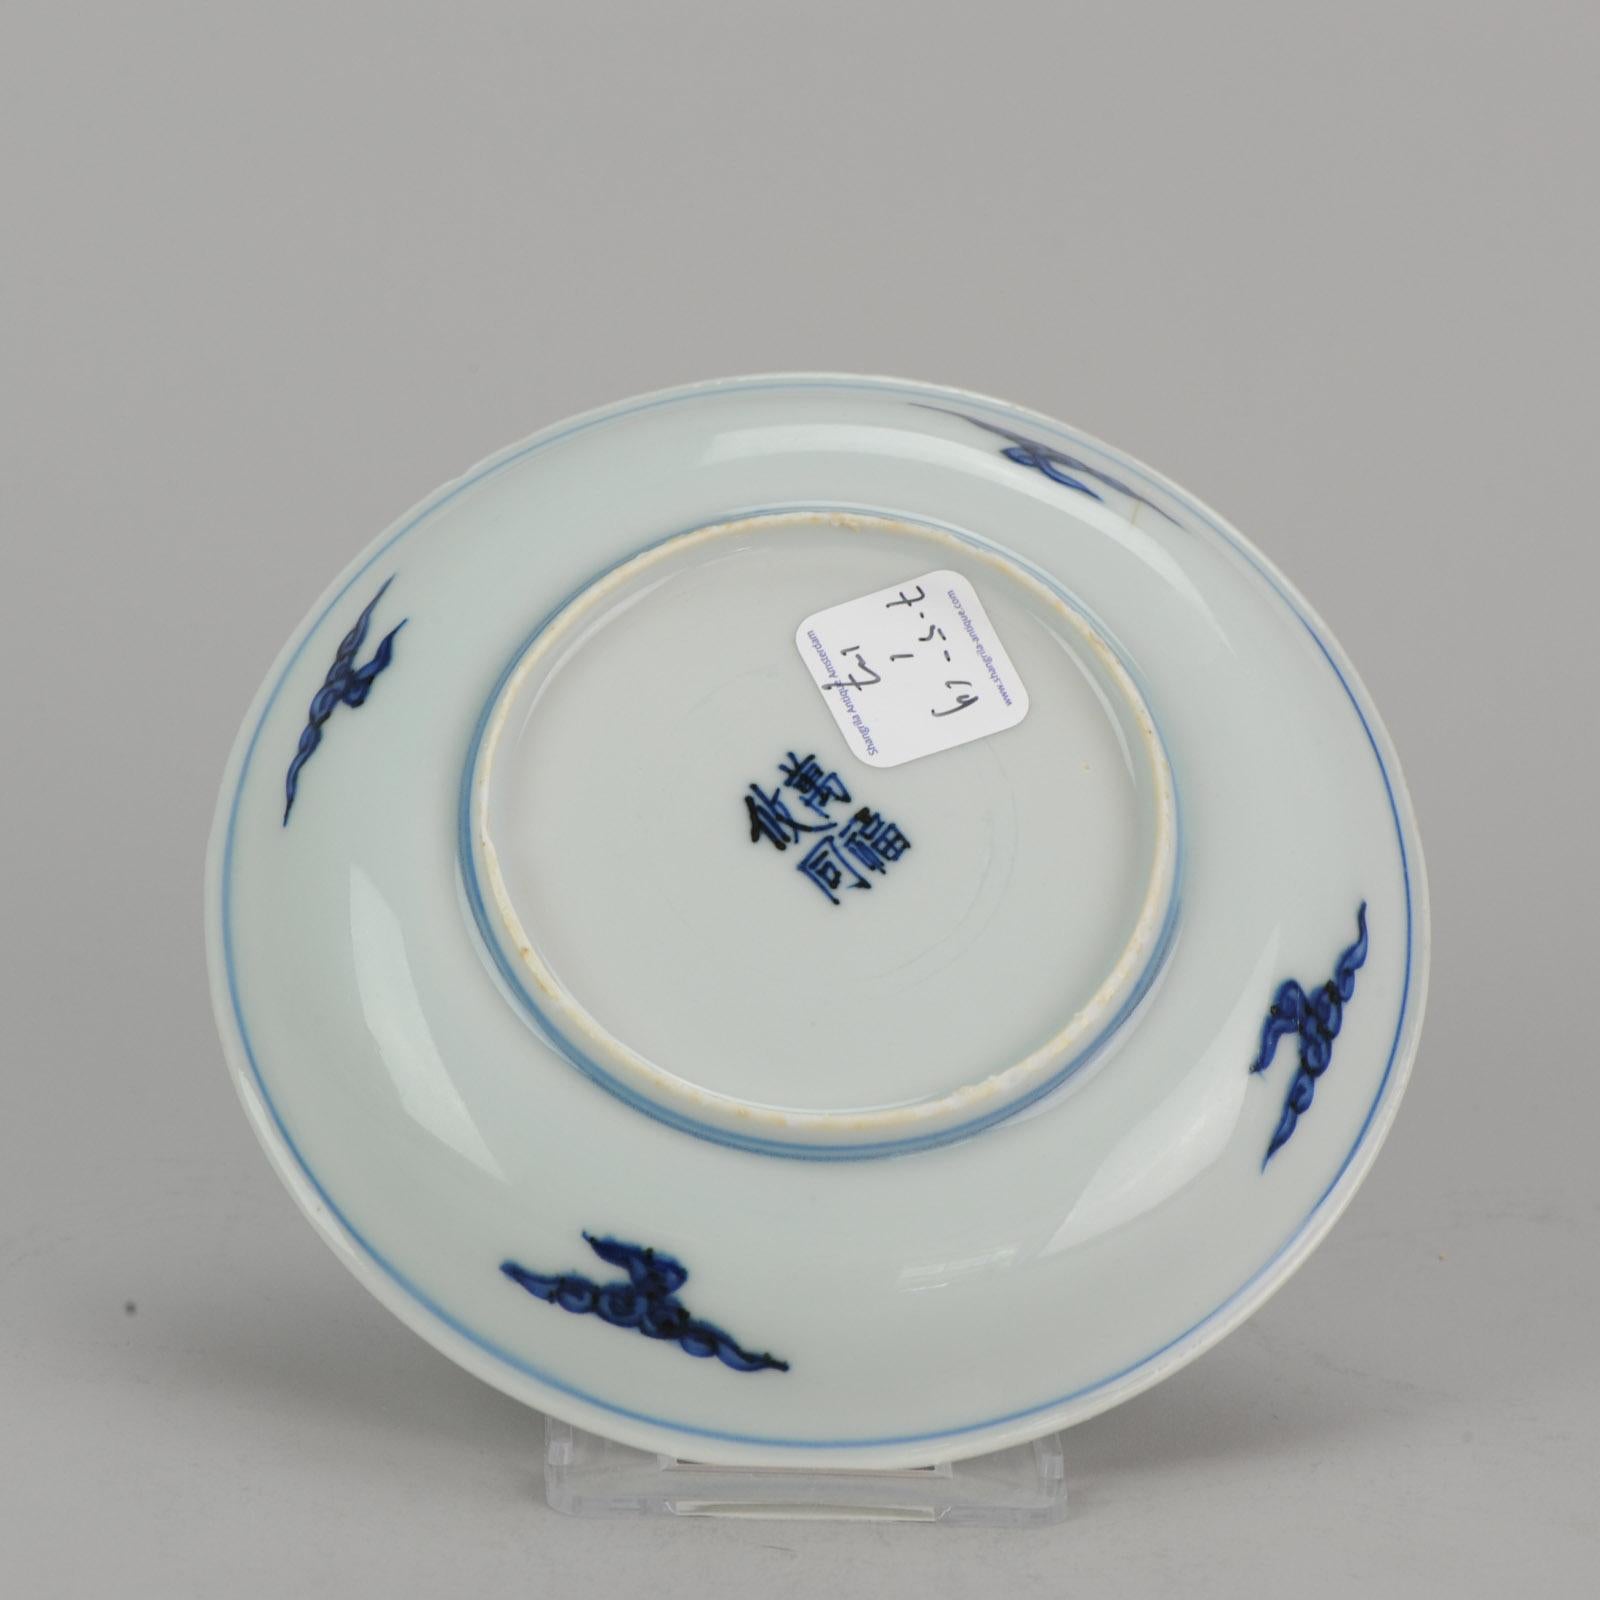 Antique Chinese Porcelain Plate 17th Century Ming Dynasty Tianqi/Chongzhen In Good Condition In Amsterdam, Noord Holland